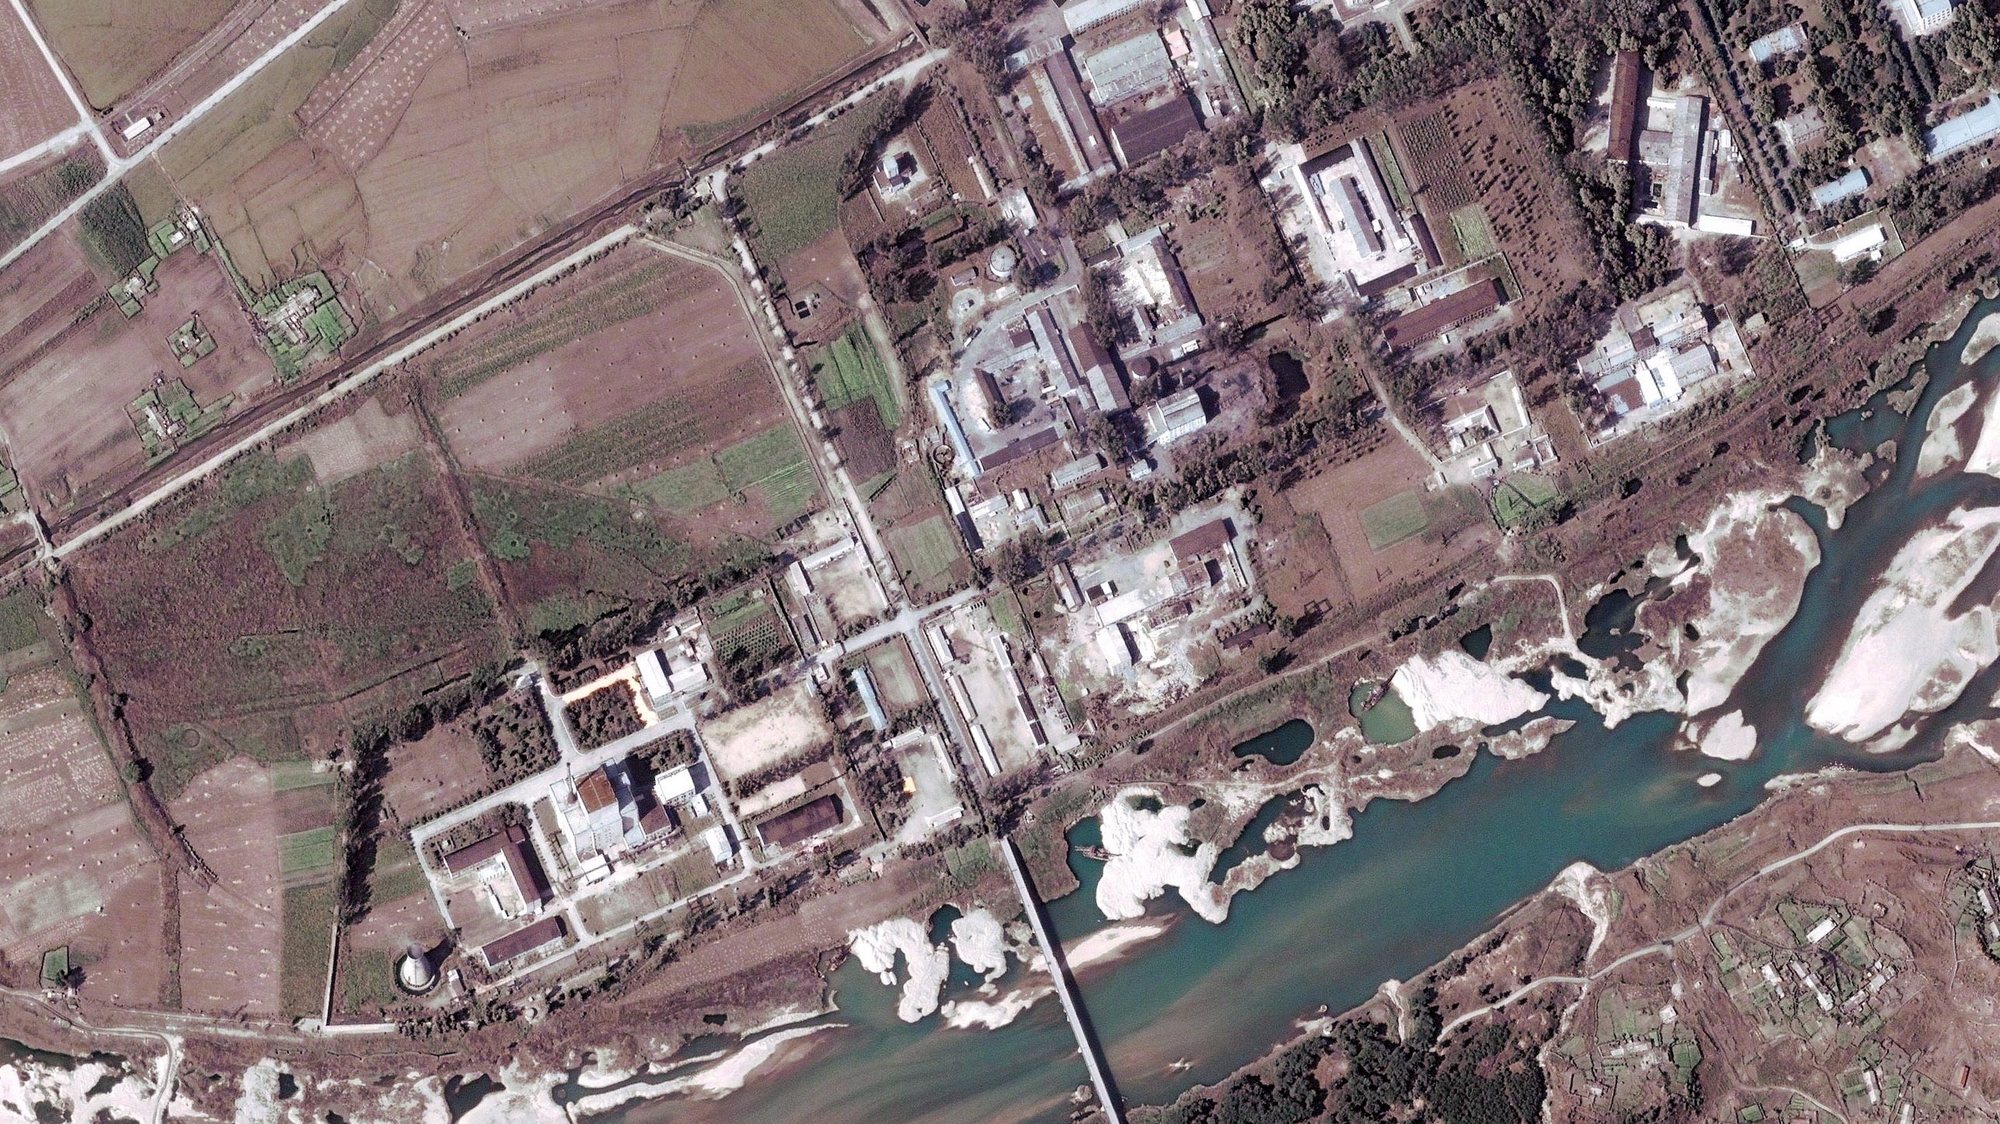 epa03647418 (FILE) A file handout satelite image provided by DigitalGlobe and dated 29 September 2004 shows the Yongbyon complex nuclear facility, some 100 km north of Pyongyang, North Korea. According to media reports on 02 April 2013, North Korea has announced that it will reopen the Yongbyon nuclear complex which was closed in 2007.  EPA/DIGITAL GLOBE / HANDOUT MANDATORY CREDIT HANDOUT EDITORIAL USE ONLY/NO SALES